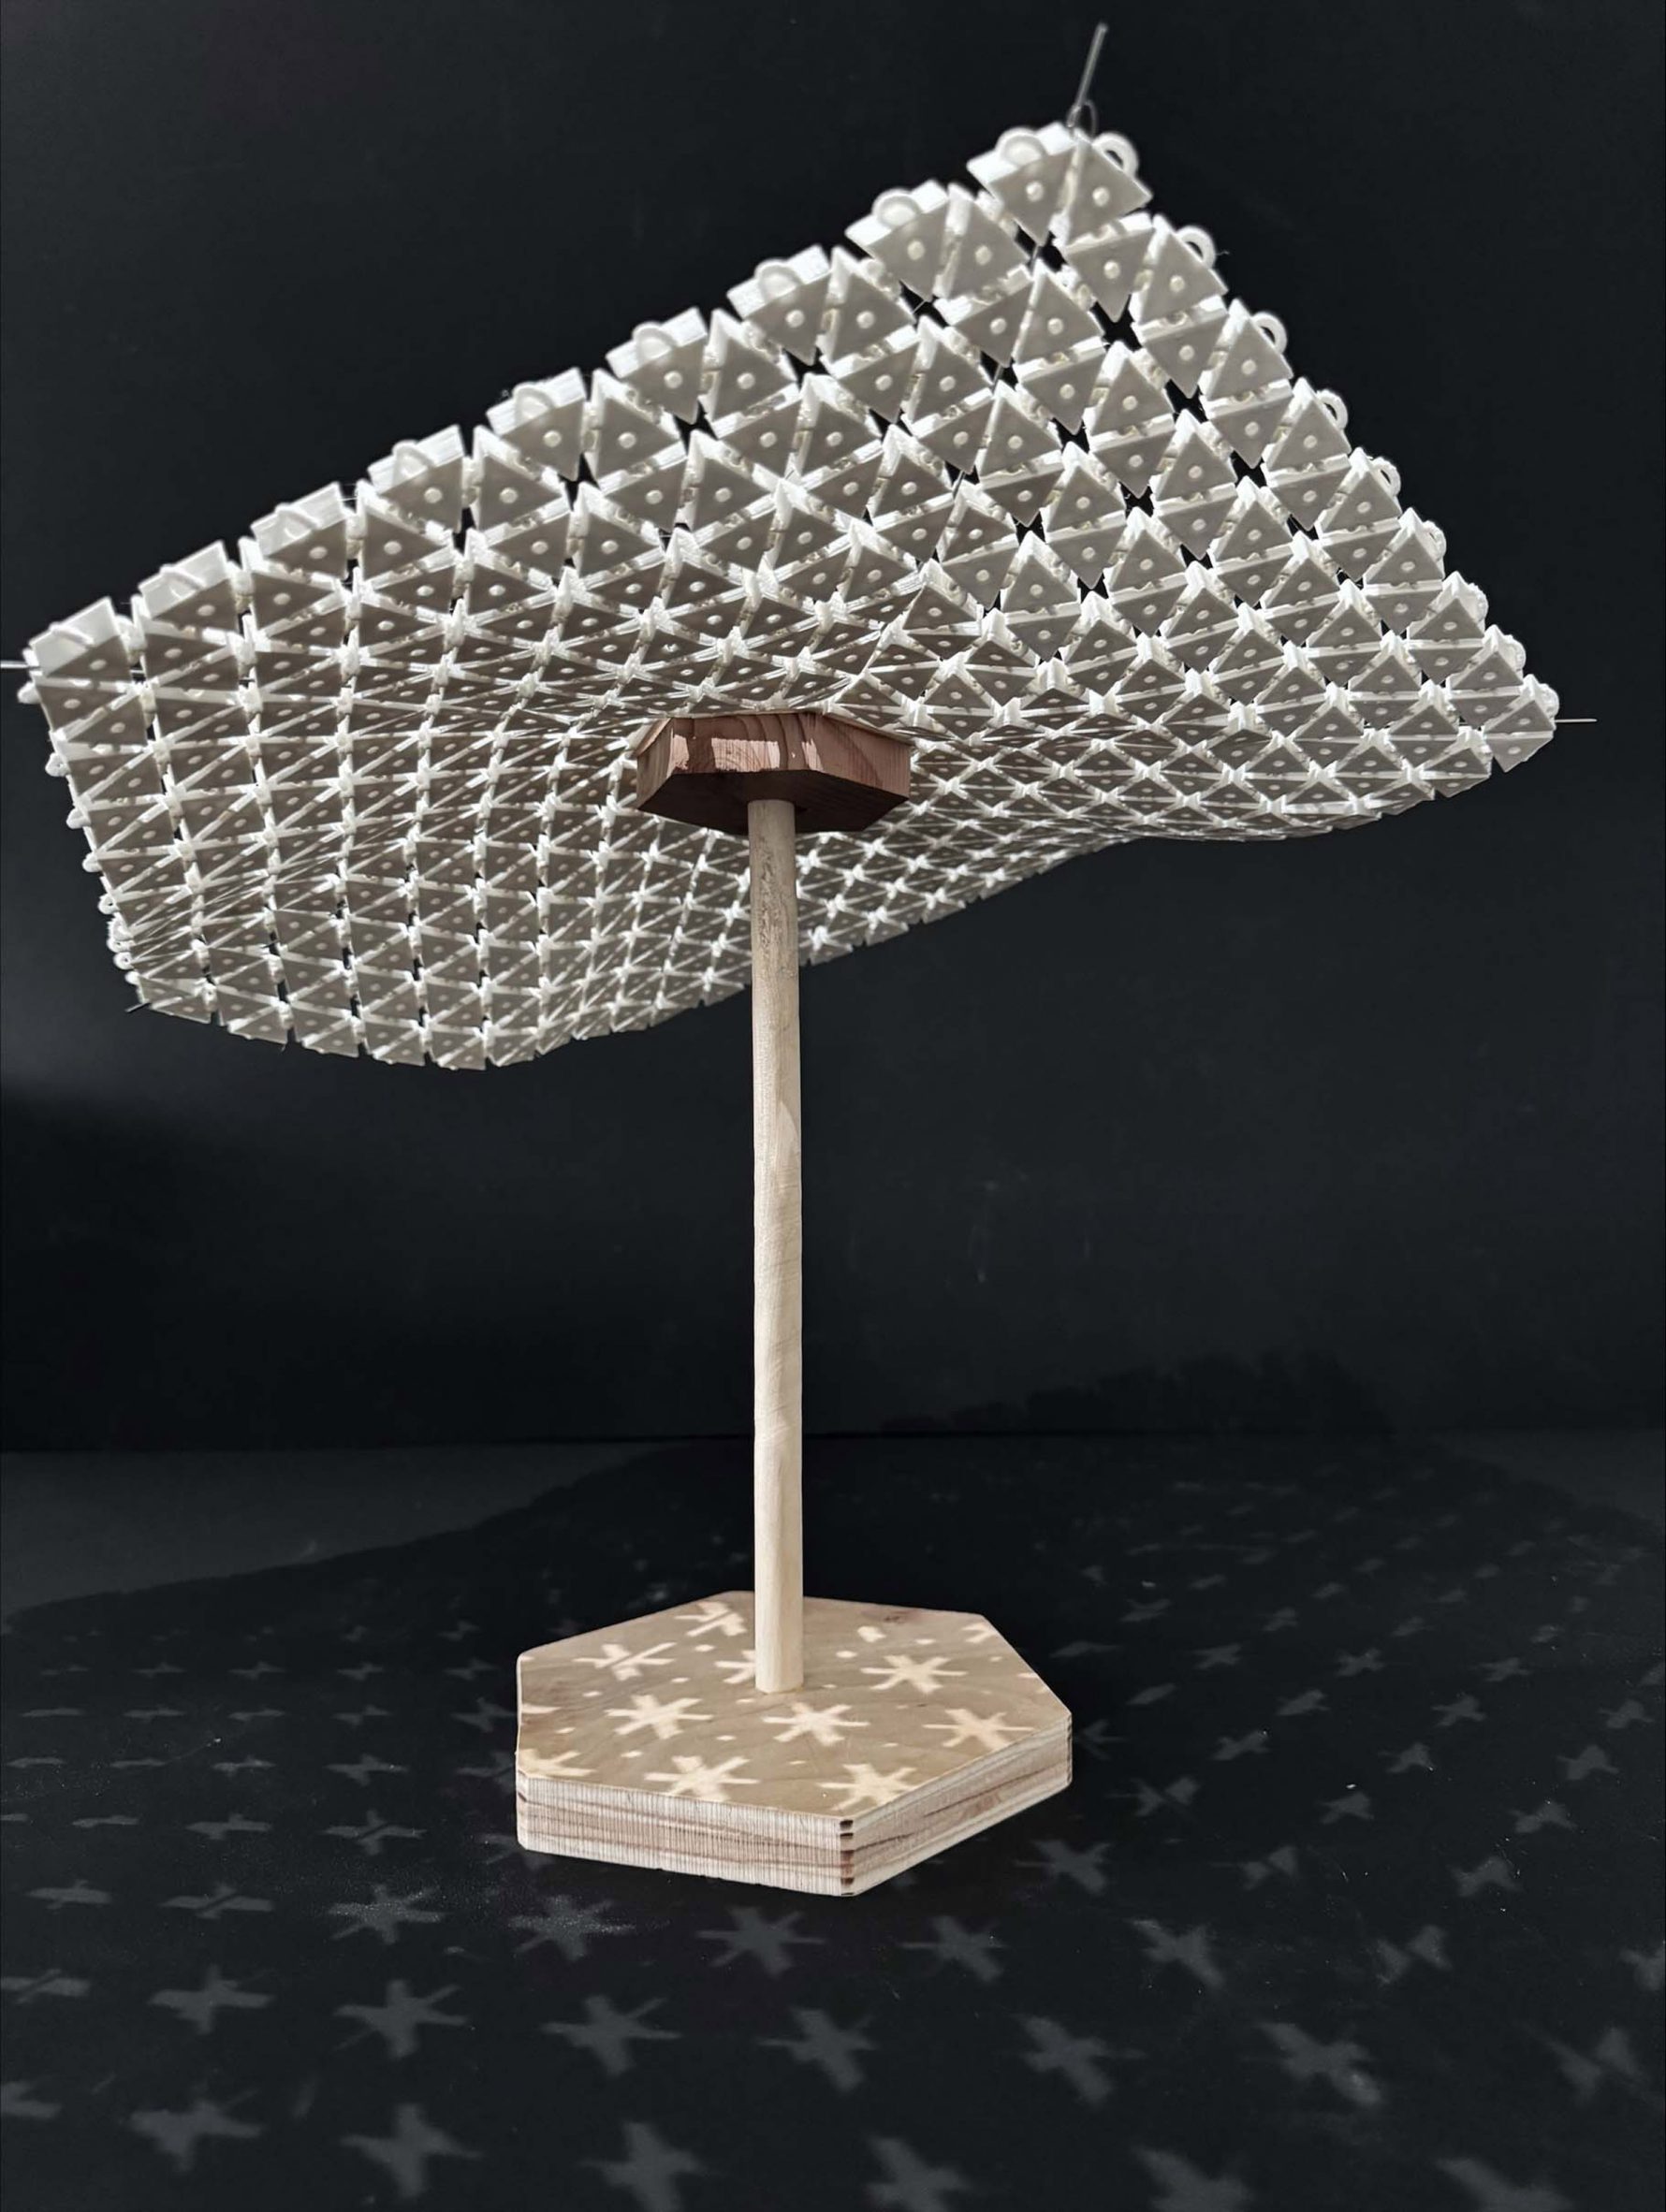 A 3D printed structure on top of a wooden base